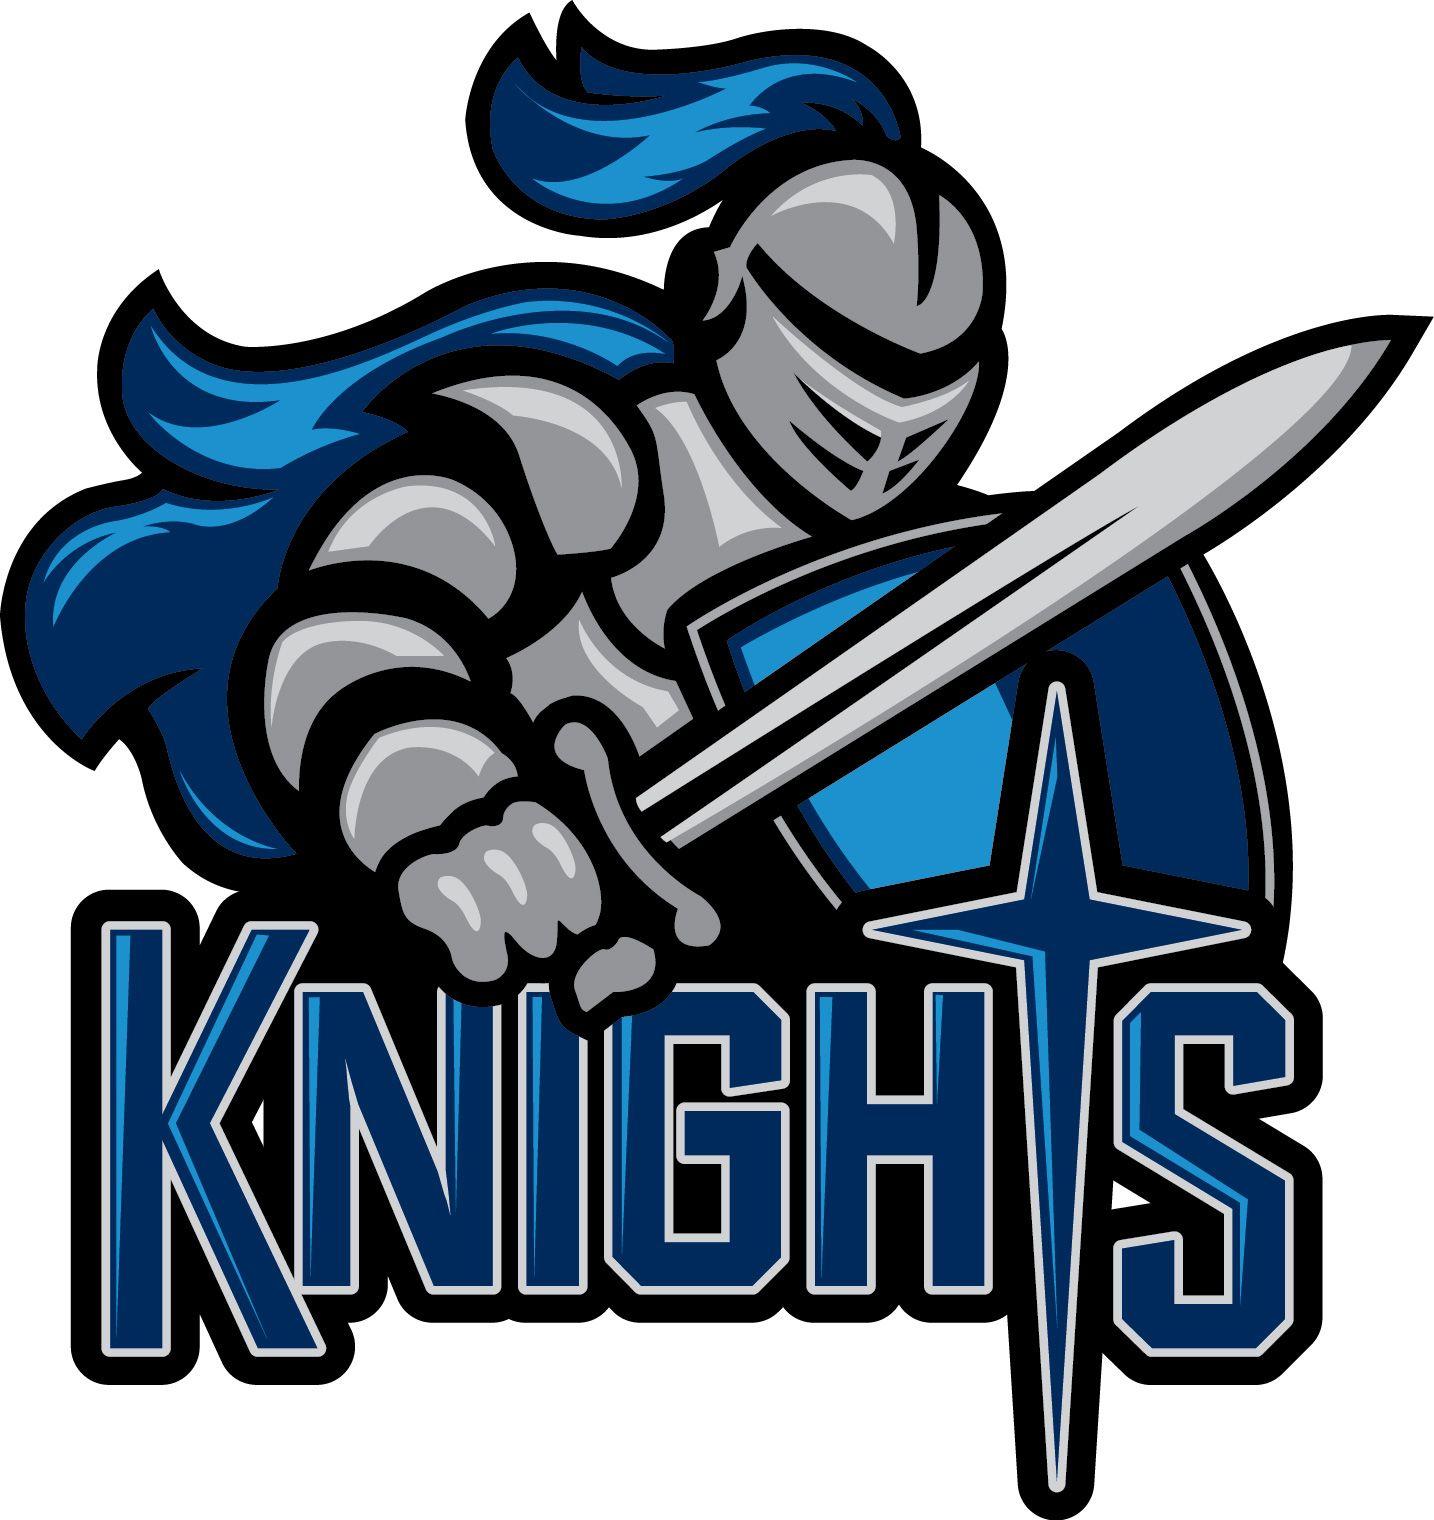 Red and Black Knights Basketball Logo - Free Knight Head Logo, Download Free Clip Art, Free Clip Art on ...